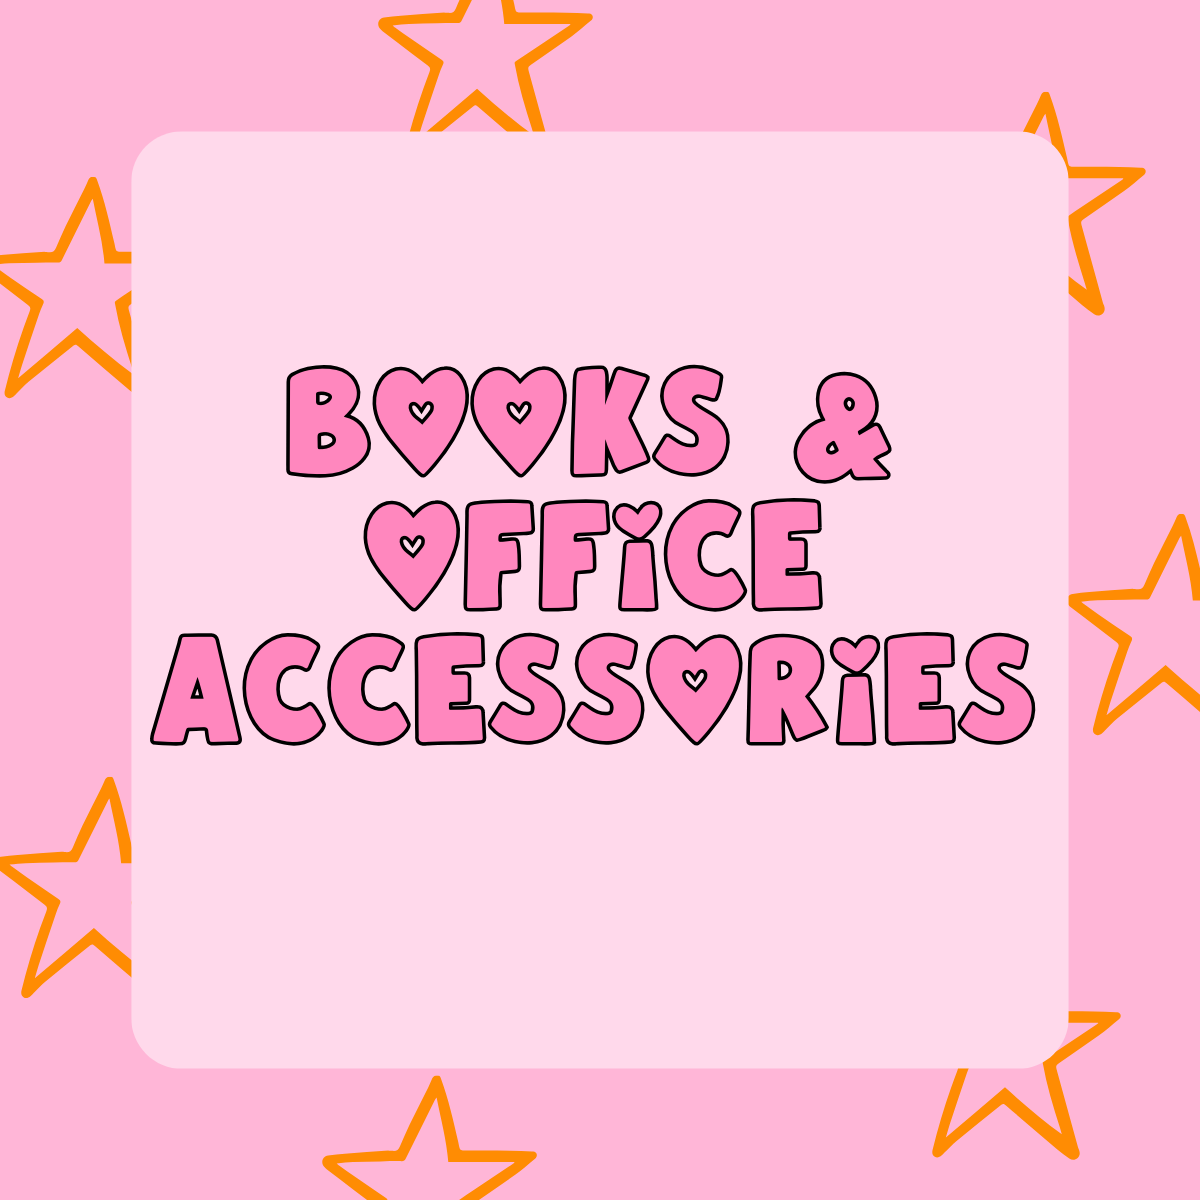 Books & Office Accessories